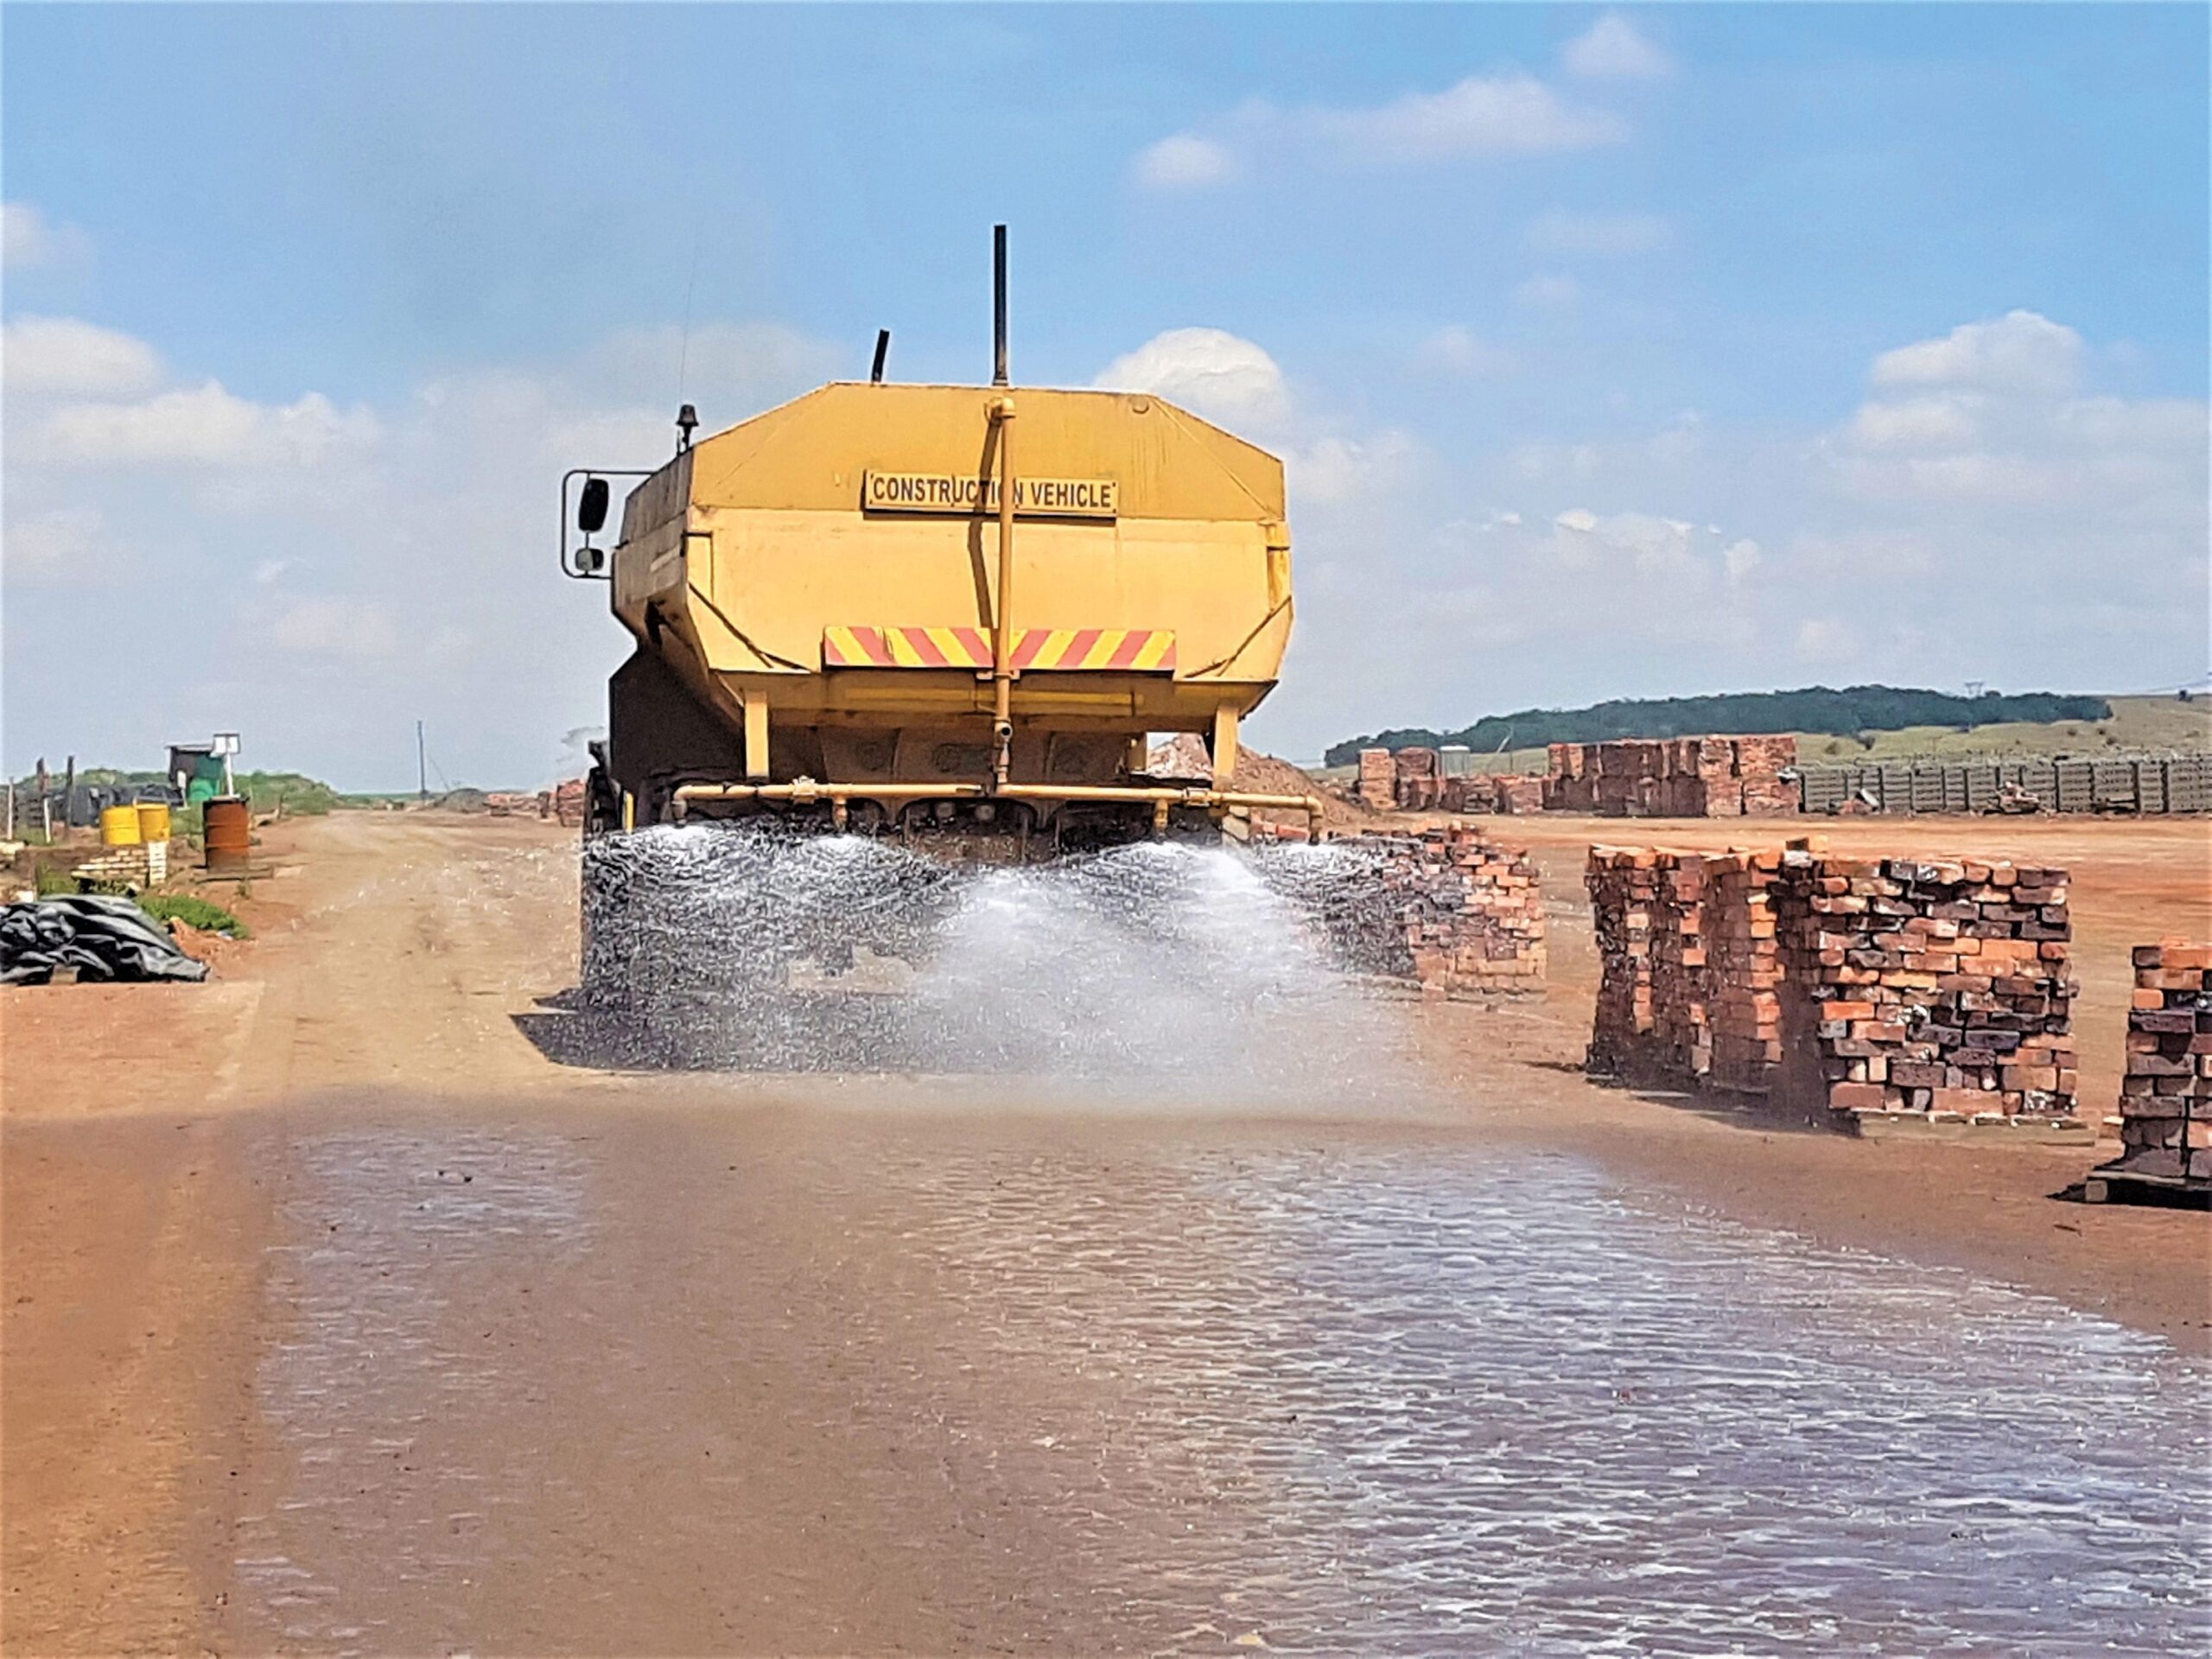 An innovative range of dust suppressants available from CHRYSO Southern Africa provides substantial benefits and enhancing operational efficiency.